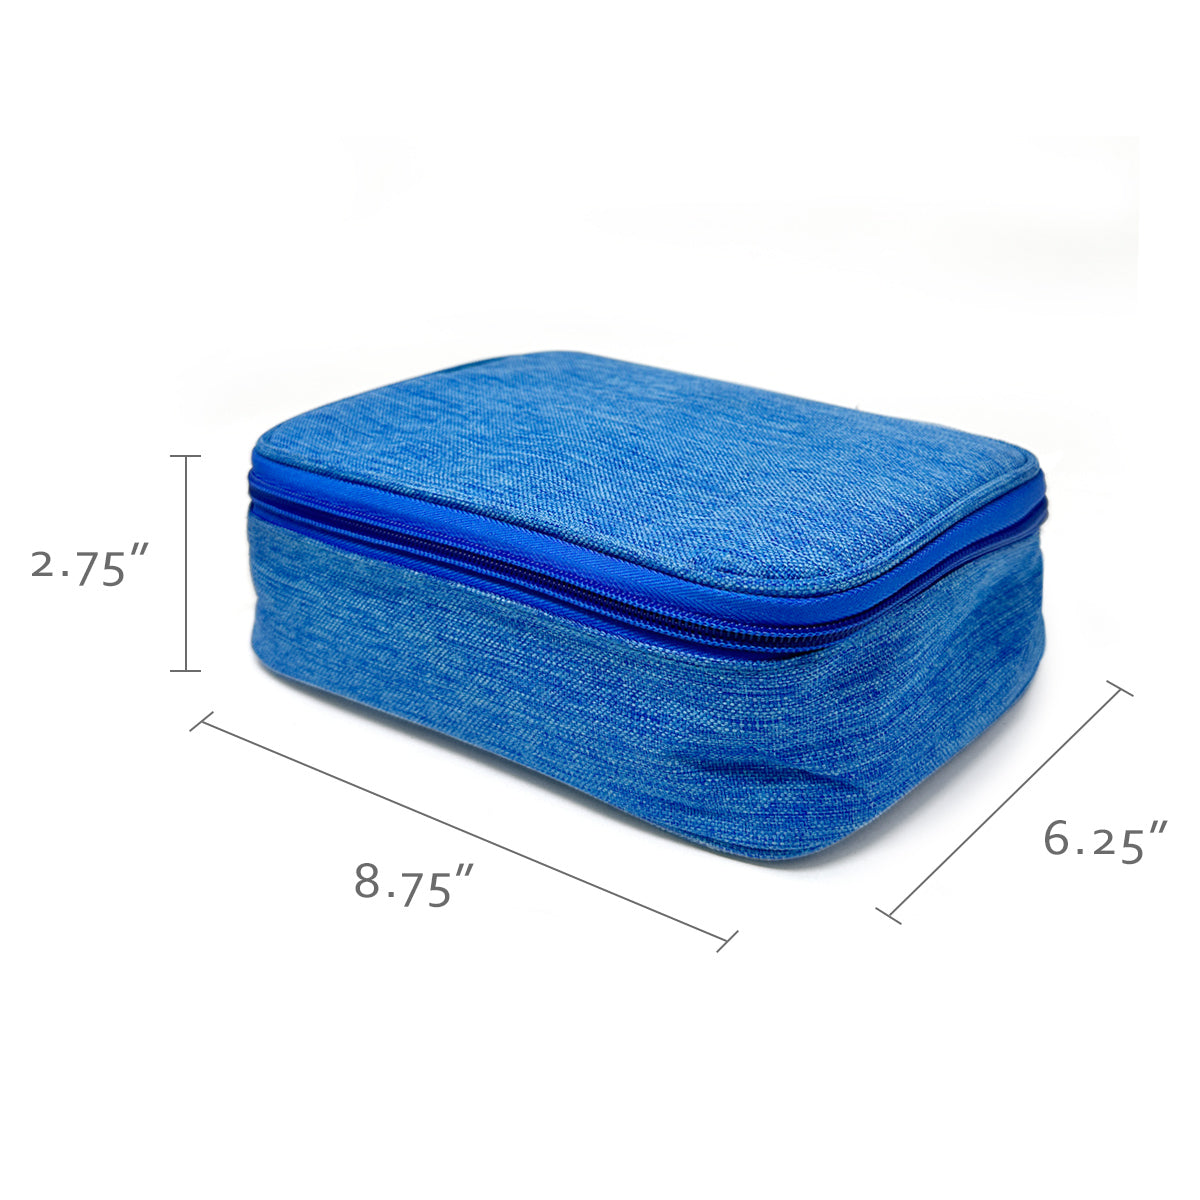 Wrapables Large Capacity 72 Slot Pencil Case for Colored Pencils, Stationery Pouch Blue